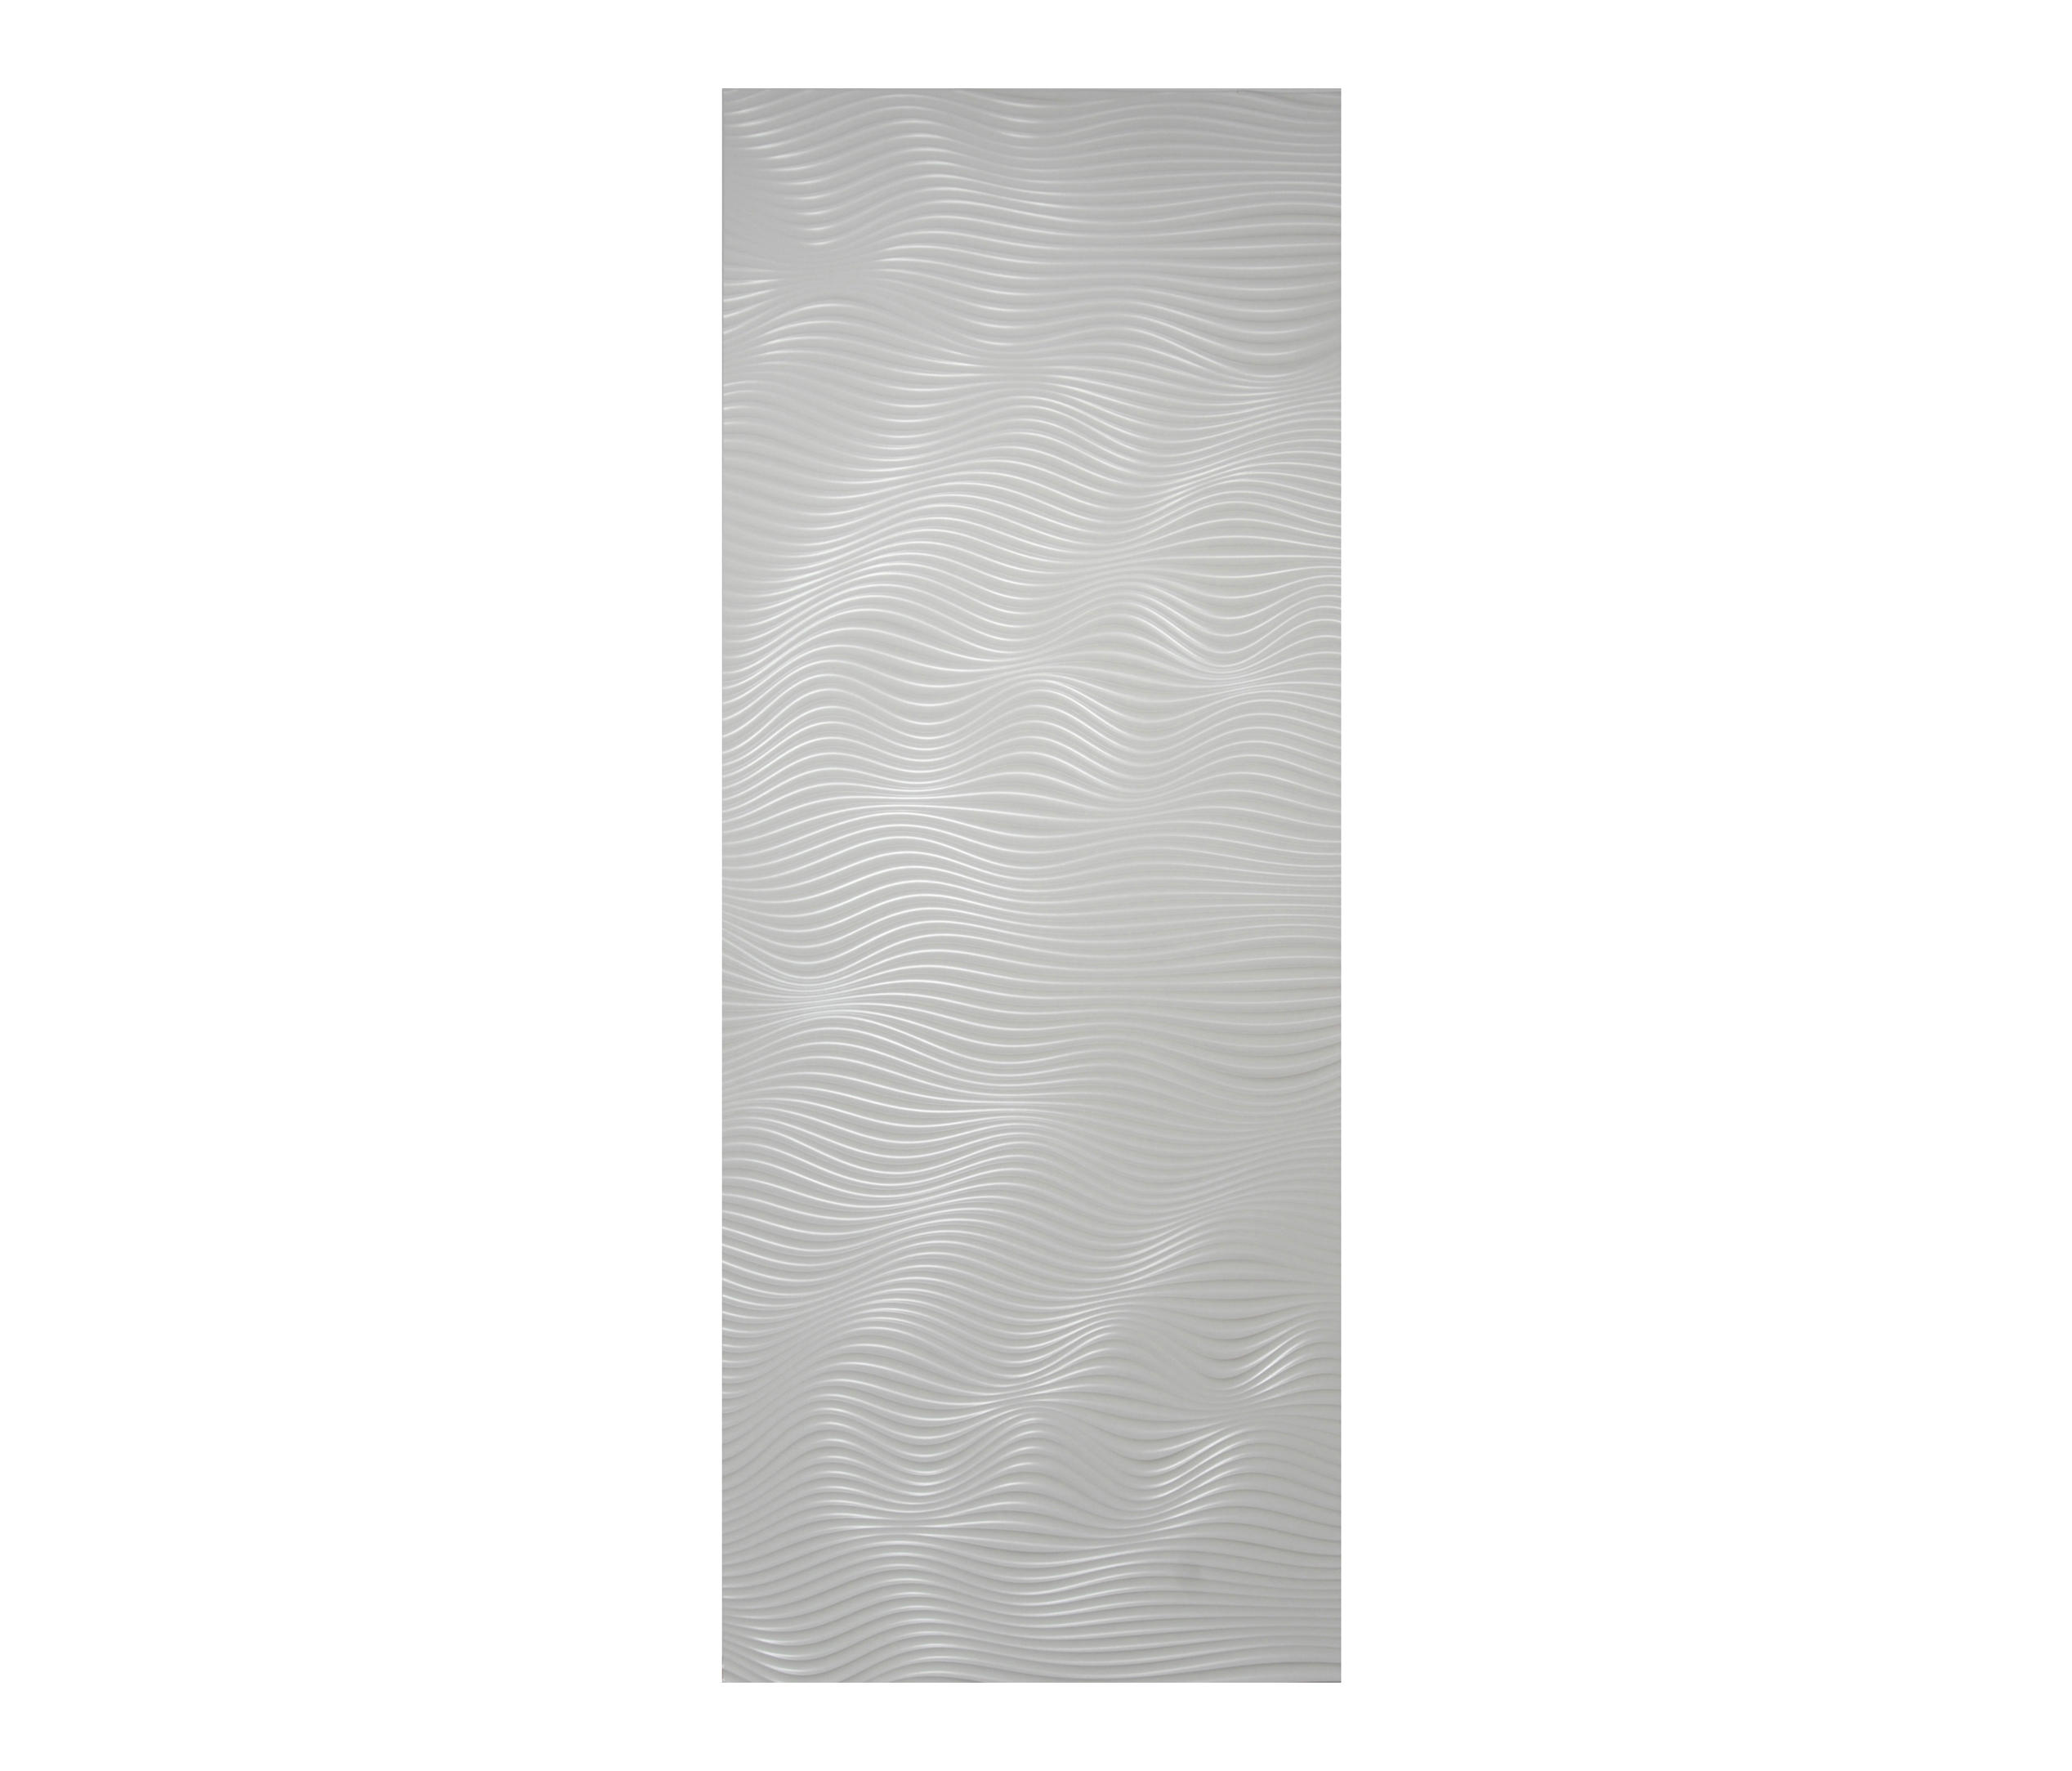 VWL001 - Concrete panels from Virtuell | Architonic